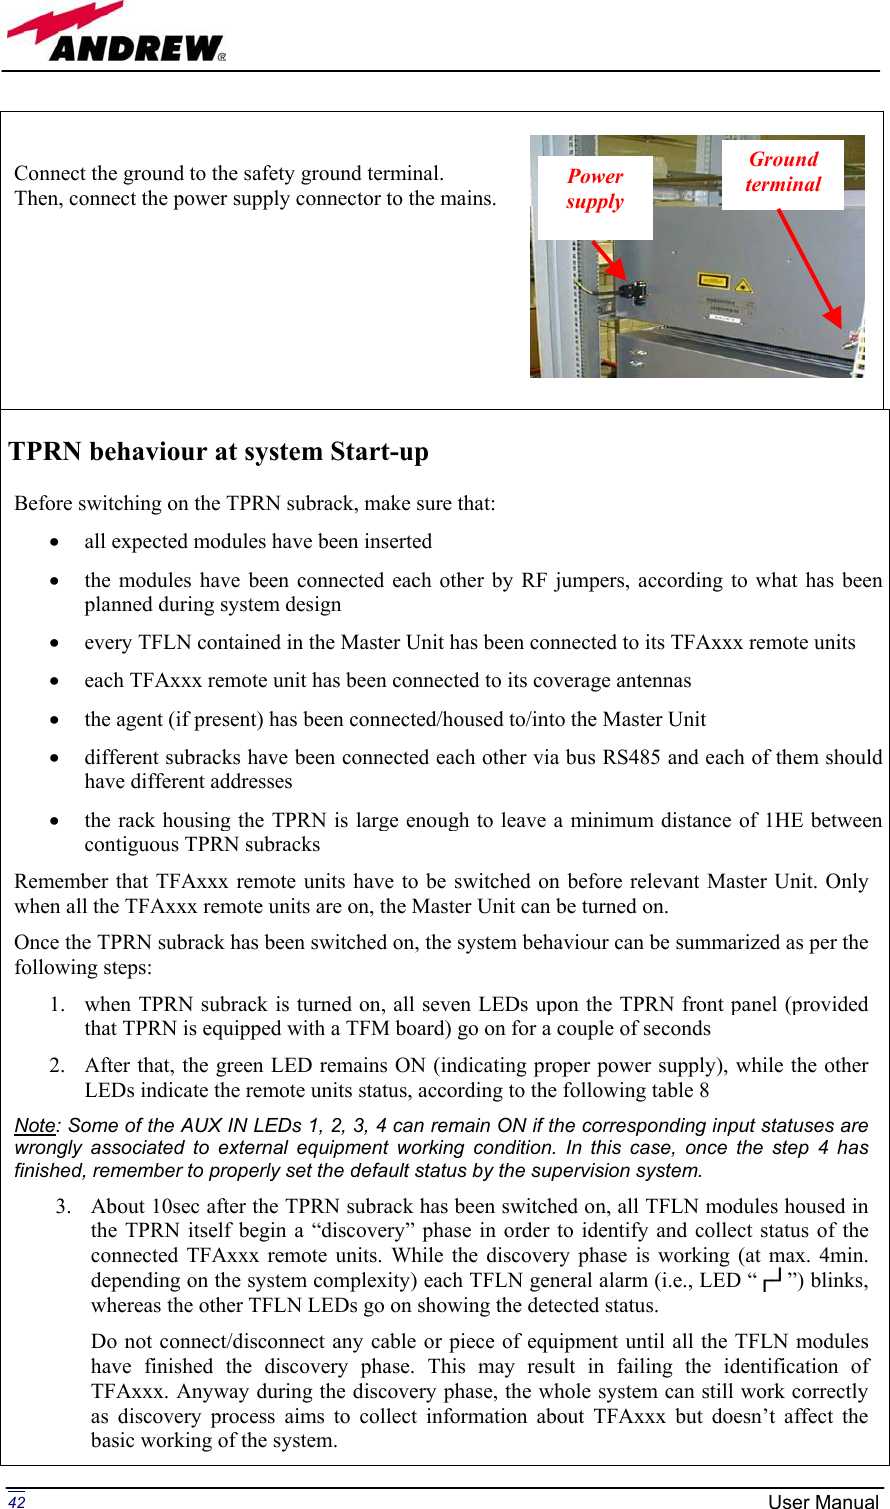 Page 42 of Andrew Wireless Innovations Group BCP-TFAM23 Model TFAM23 Downlink Booster User Manual MN024 04 rev3